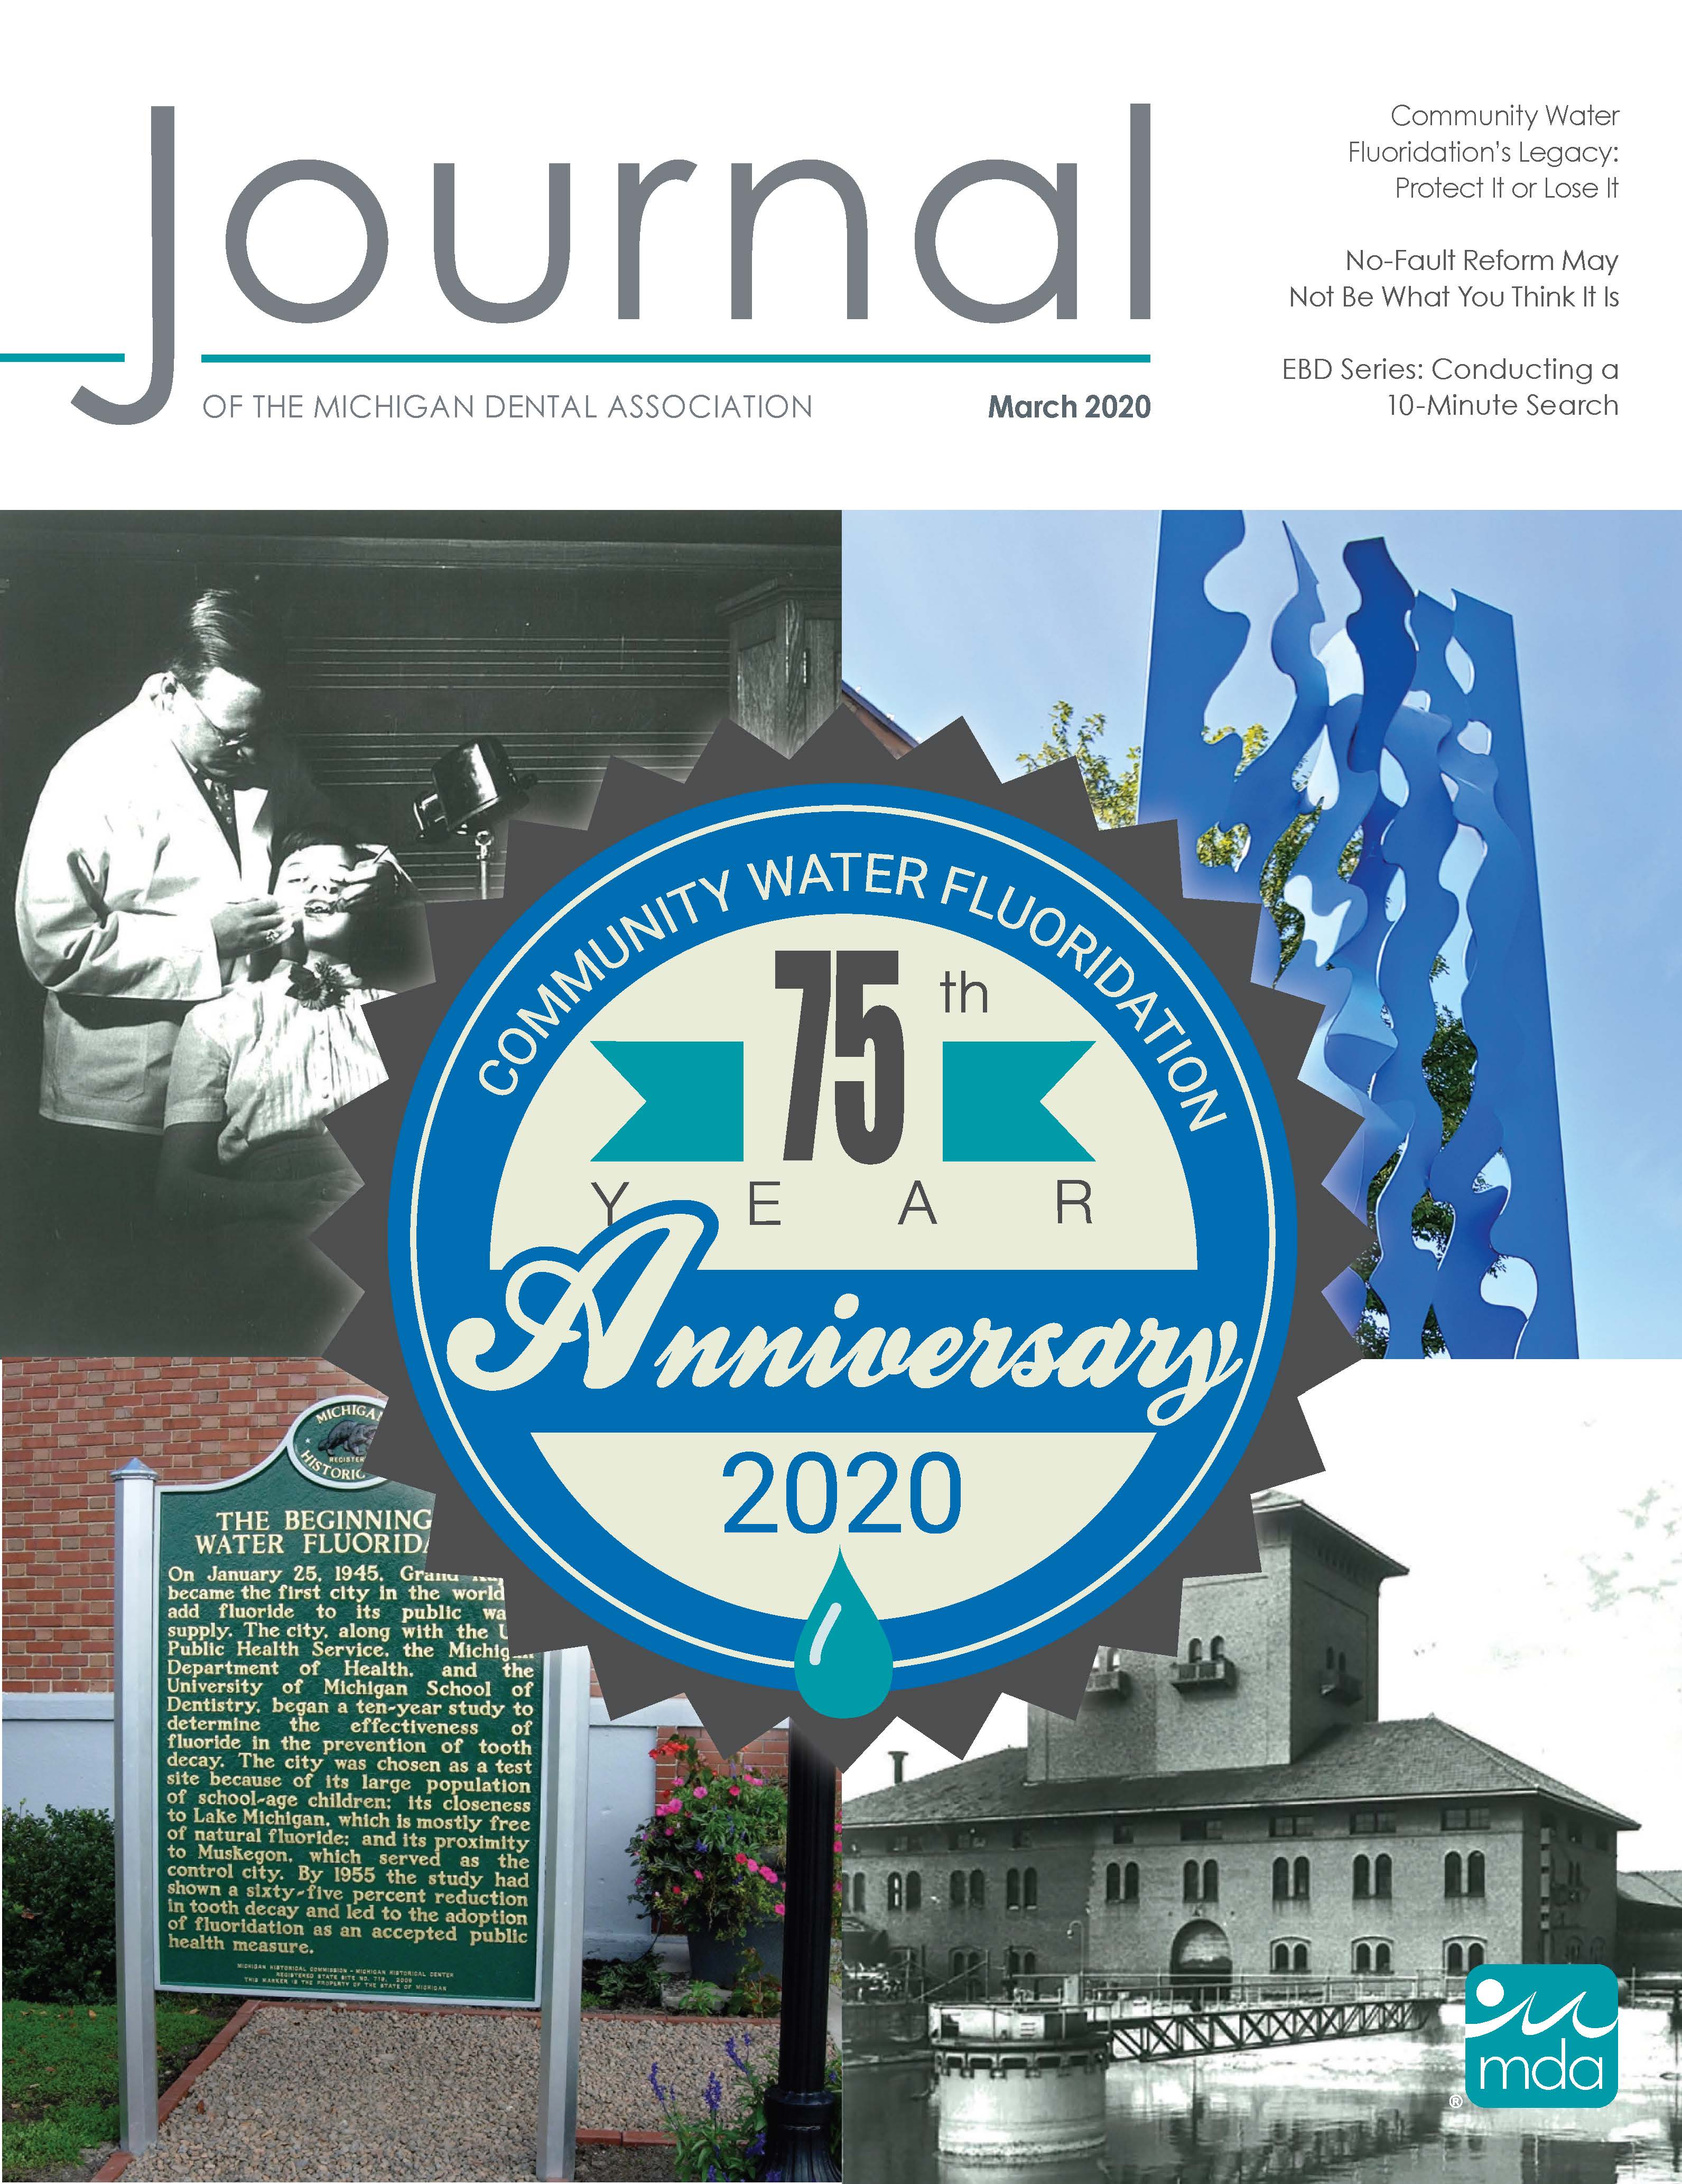 Cover of the Journal of the Michigan Dental Association with segmented into four sections with a large stamp in the middle that reads community water fluoridation 75th year anniversary 2020. The four segments show a black and white photo of a dental exam, a blue wavy sculpture, an industrial looking building on the water, and a plaque commemorating the beginning of water fluoridation.